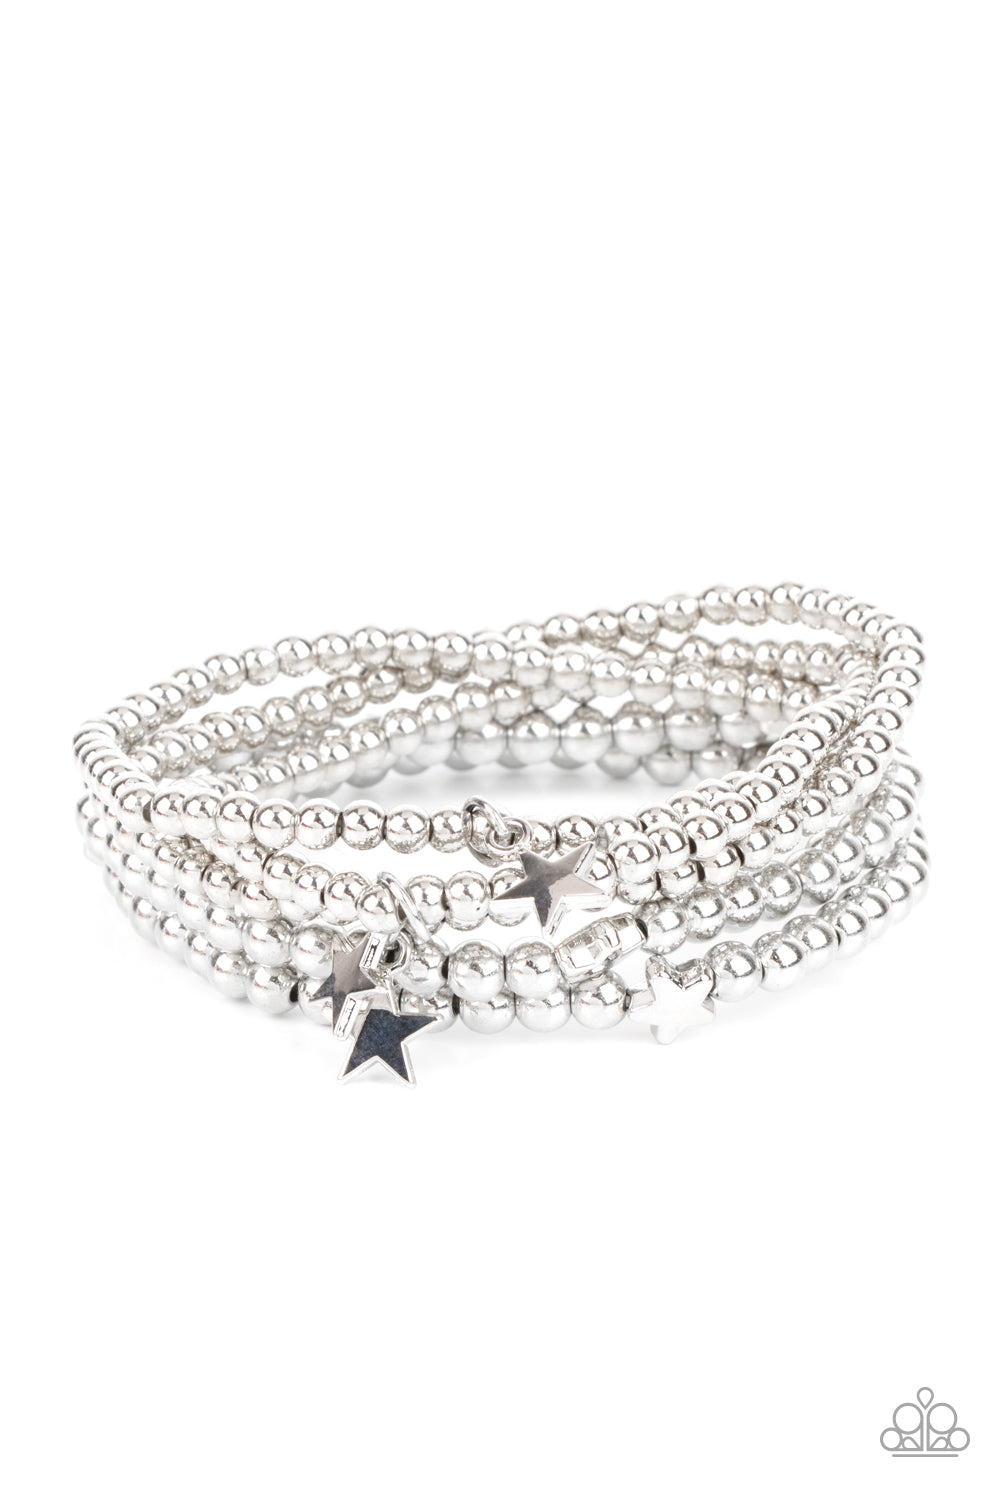 American All-Star Silver Bracelet - Paparazzi Accessories  Infused with dainty silver star beads and shiny silver star charms, strands of silver beaded stretchy bands stack across the wrist, creating a patriotic shimmer.  All Paparazzi Accessories are lead free and nickel free!  Sold as one individual bracelet.